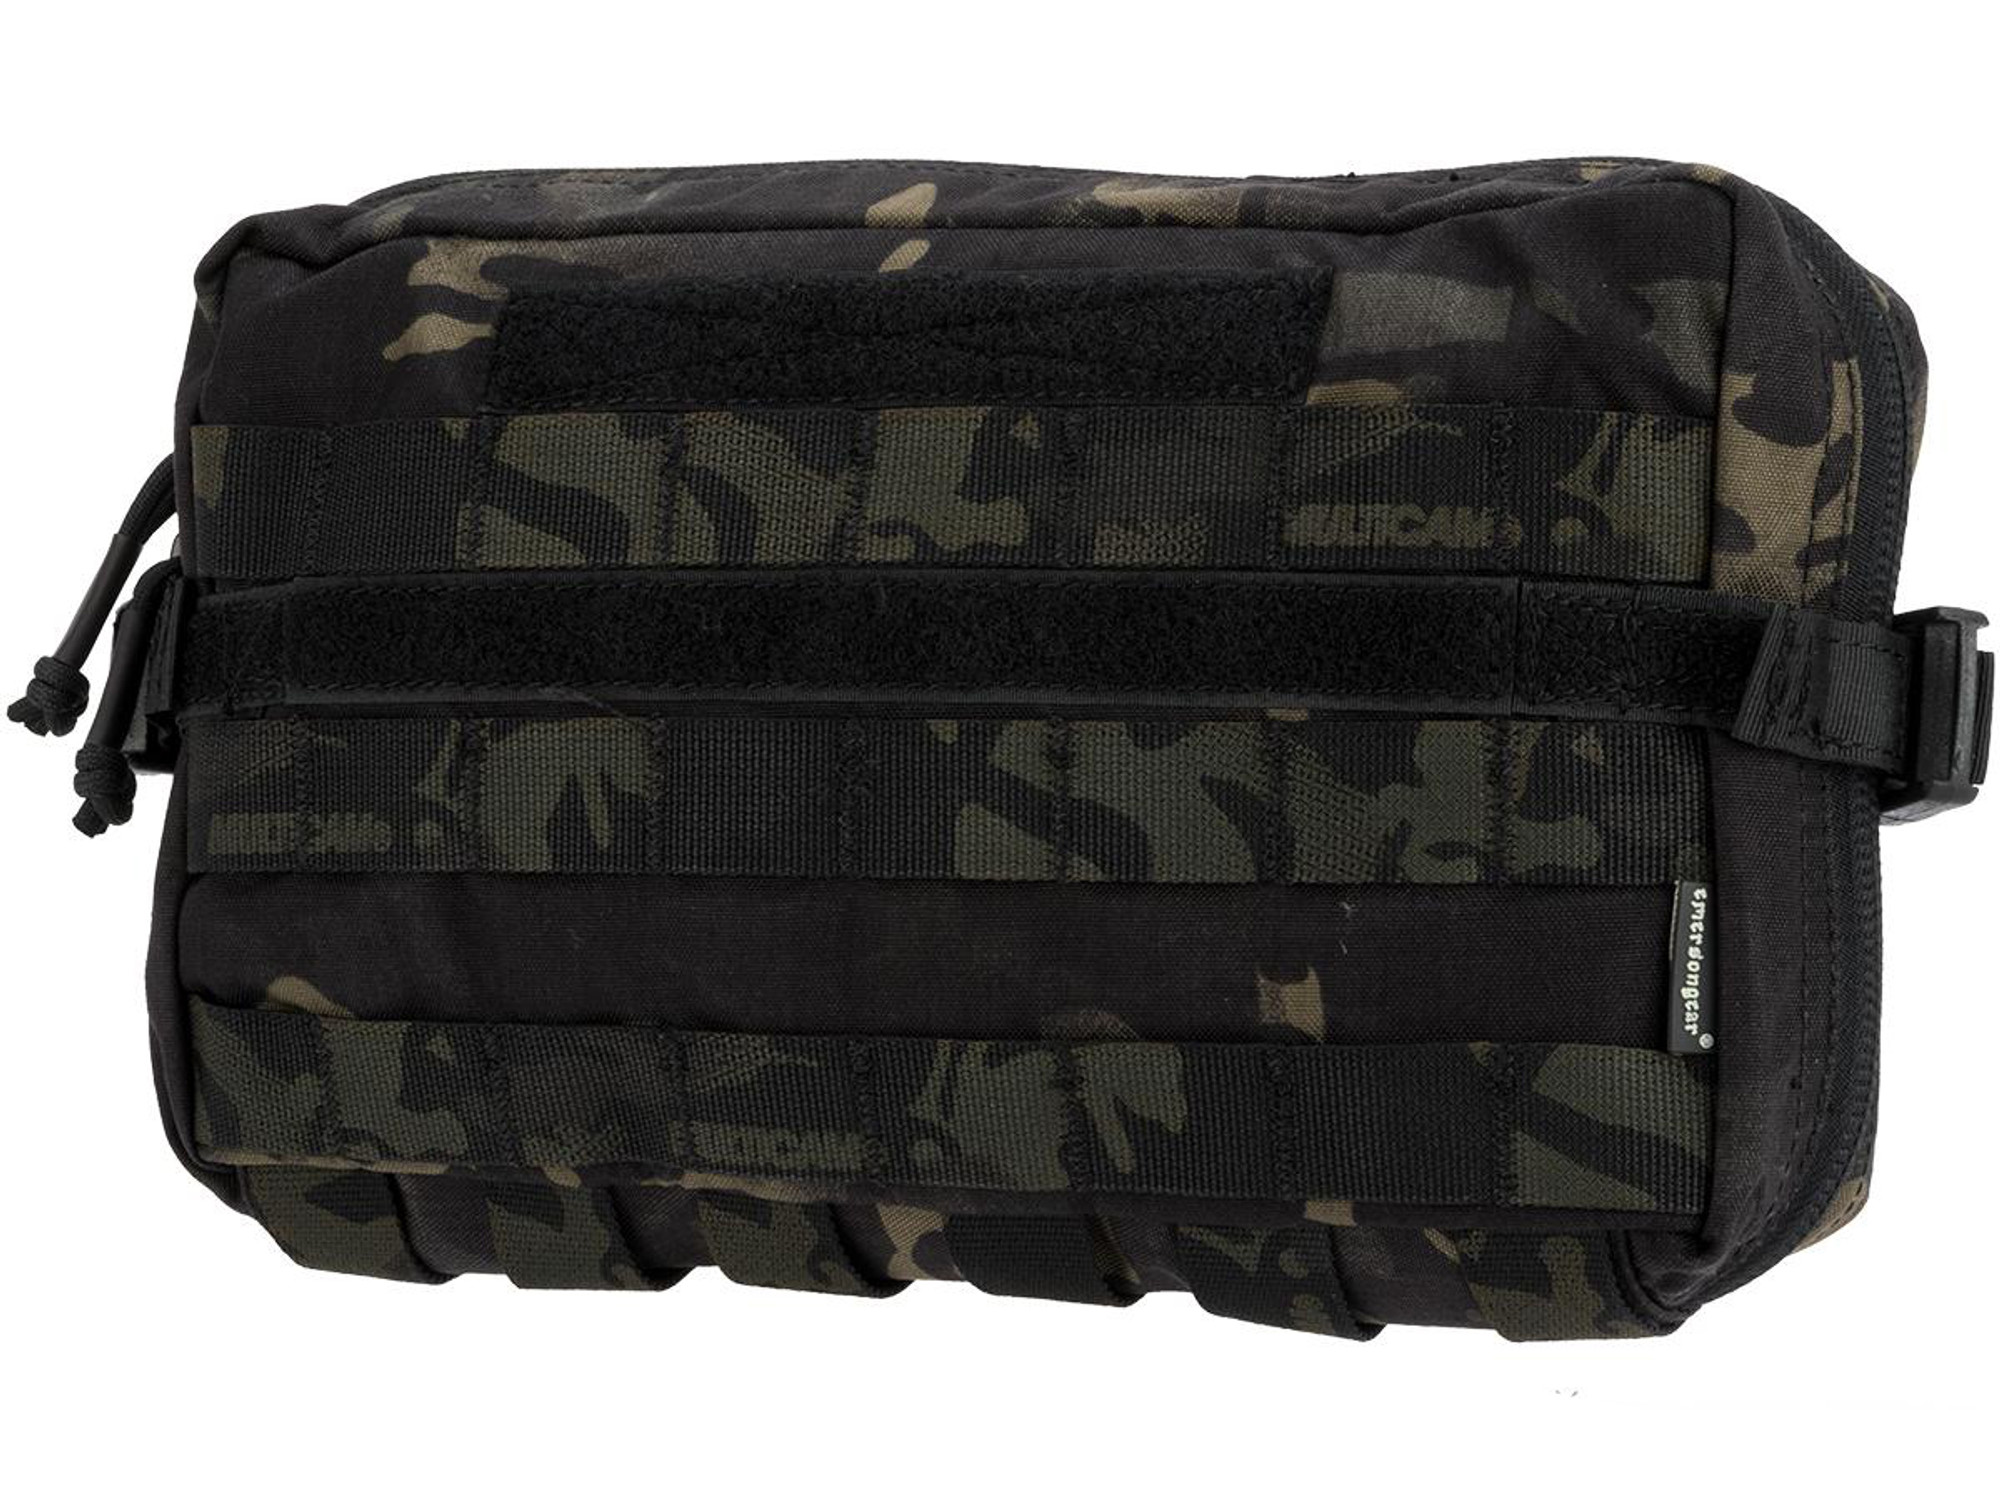 Emerson Gear Multi-Functional Large Utility Pouch